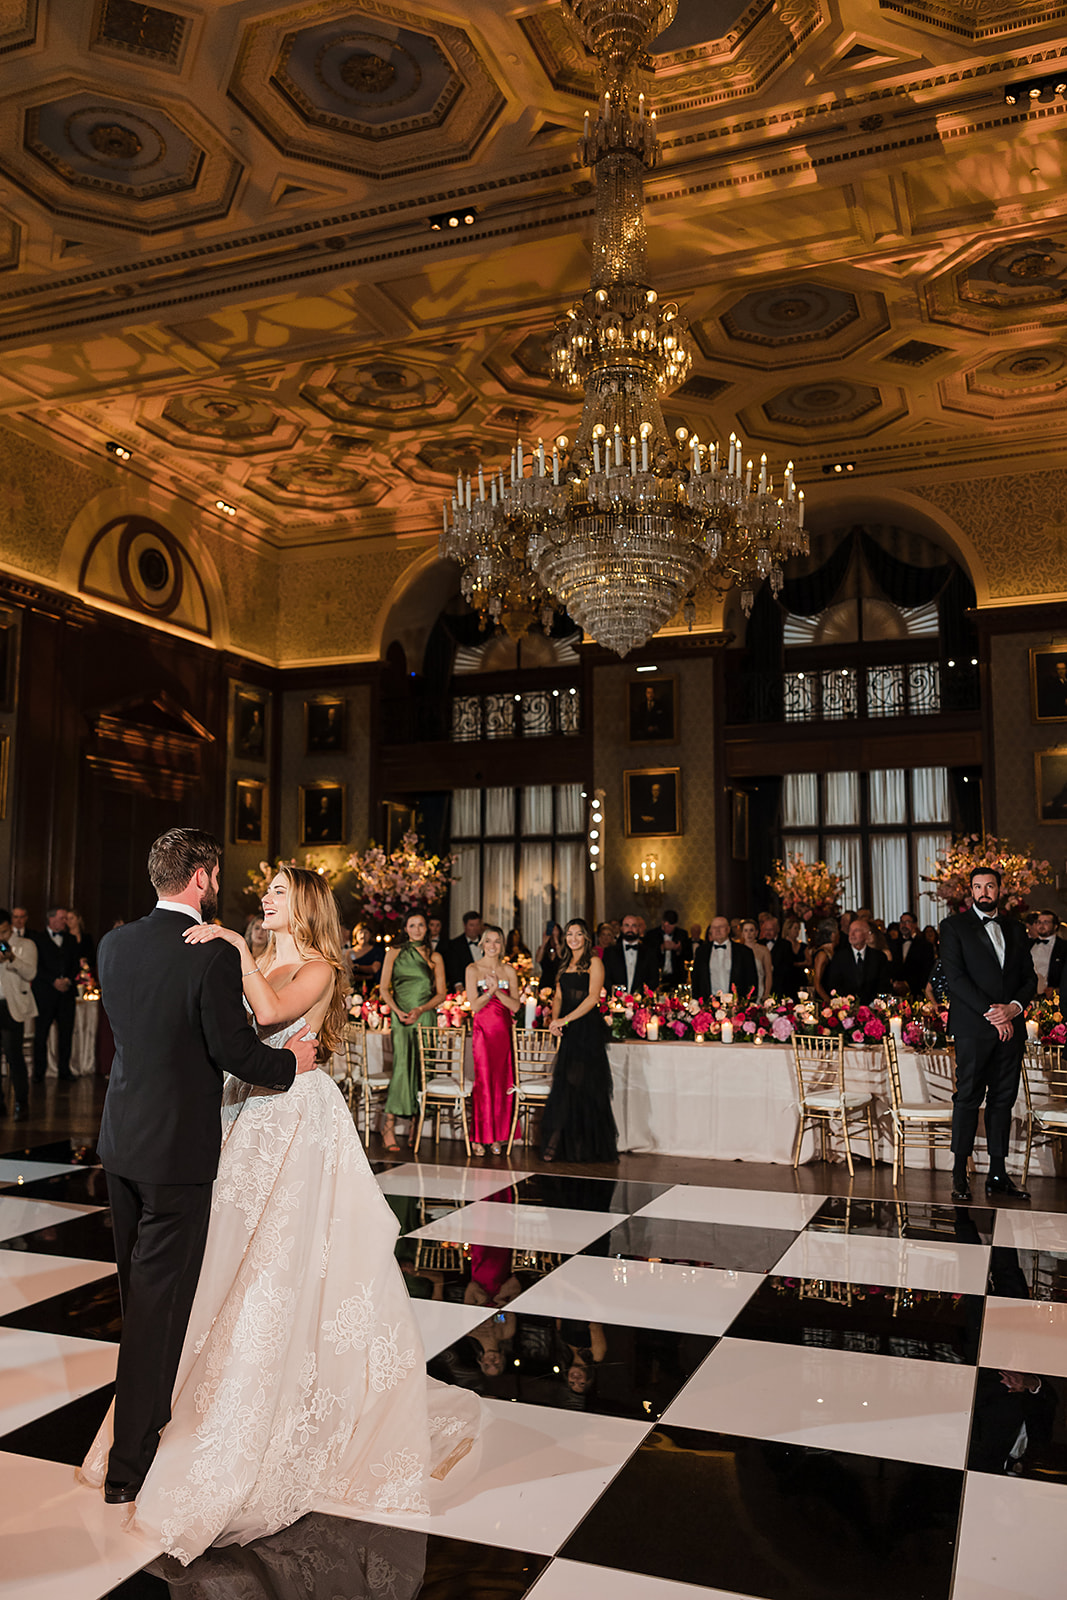 Bride and groom first dance on a checked floor at the Union League in Philly